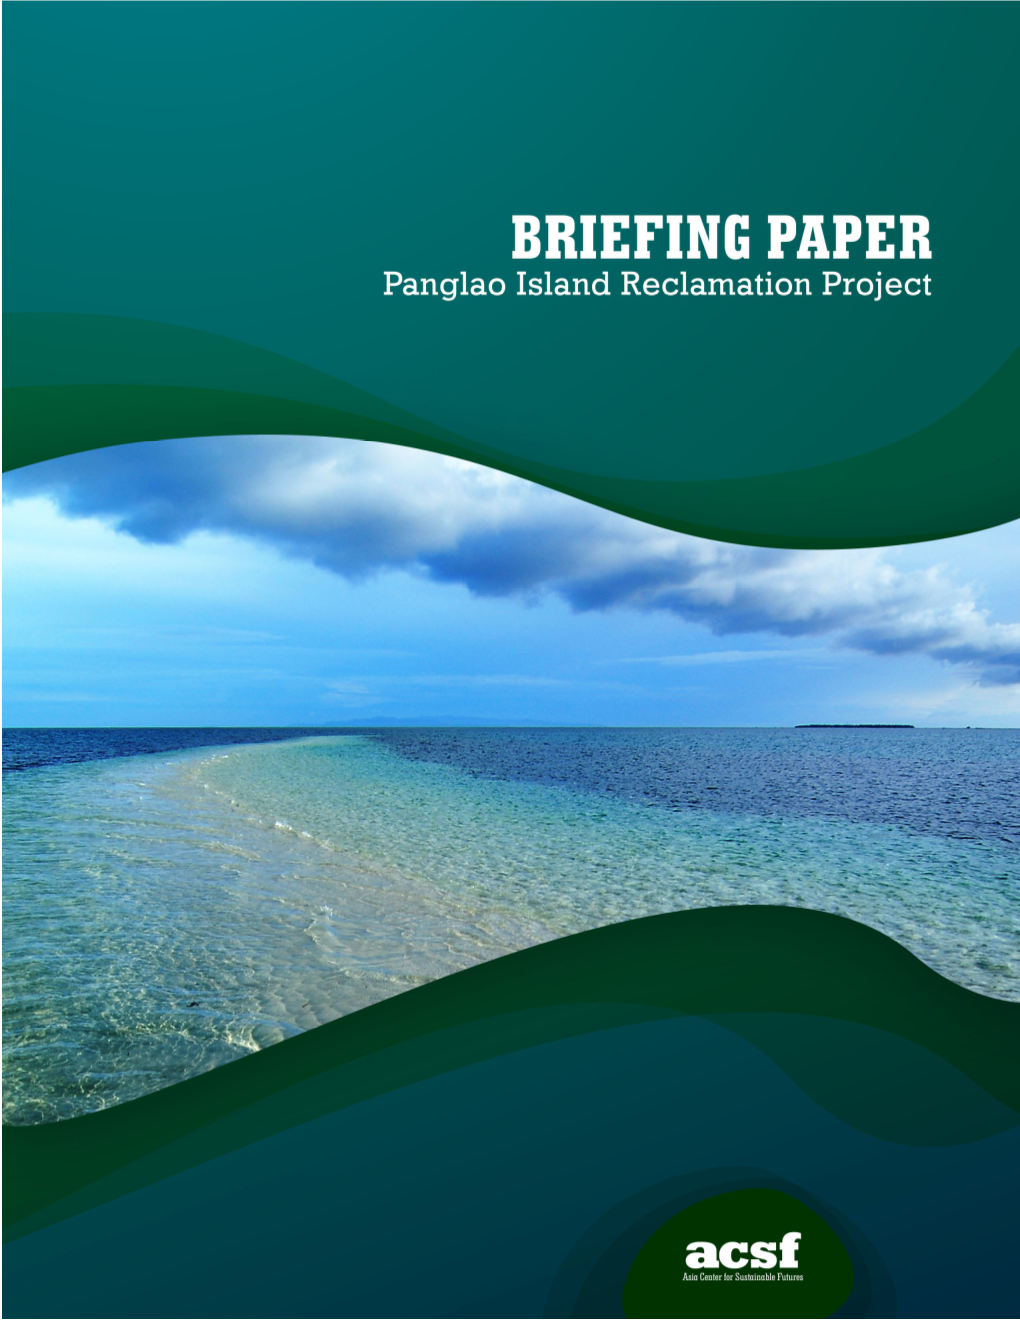 Briefing-Paper-Panglao-Reclamation.Pdf